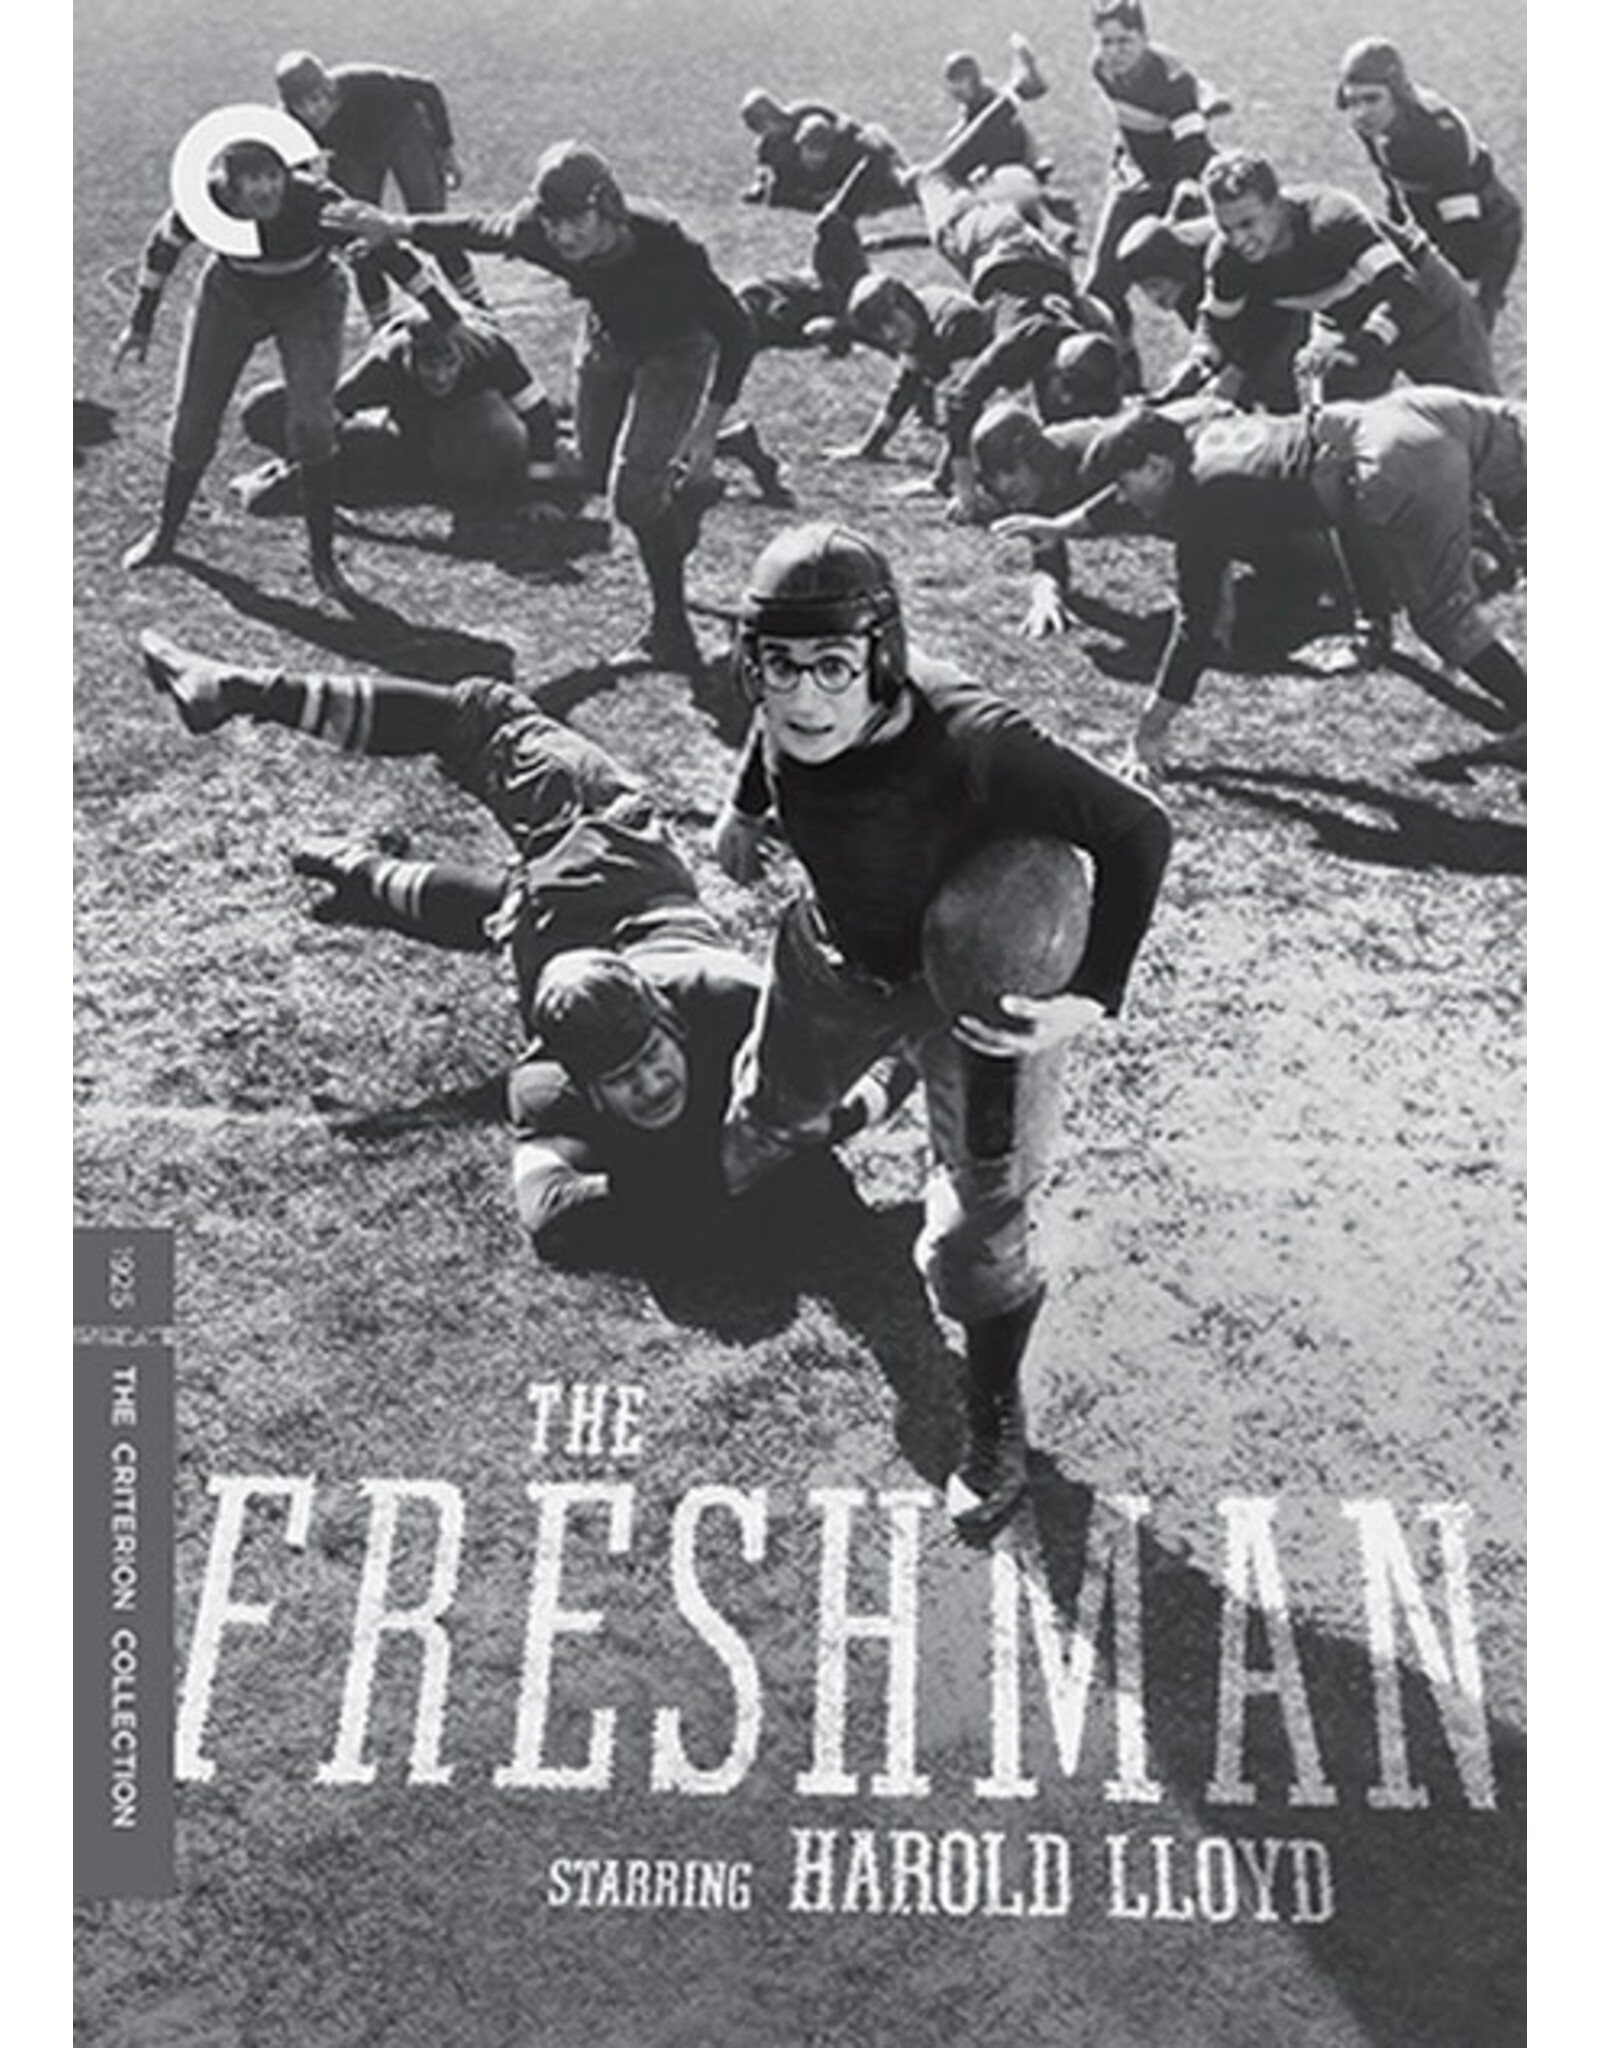 Criterion Collection Freshman, The - The Criterion Collection (Brand New)